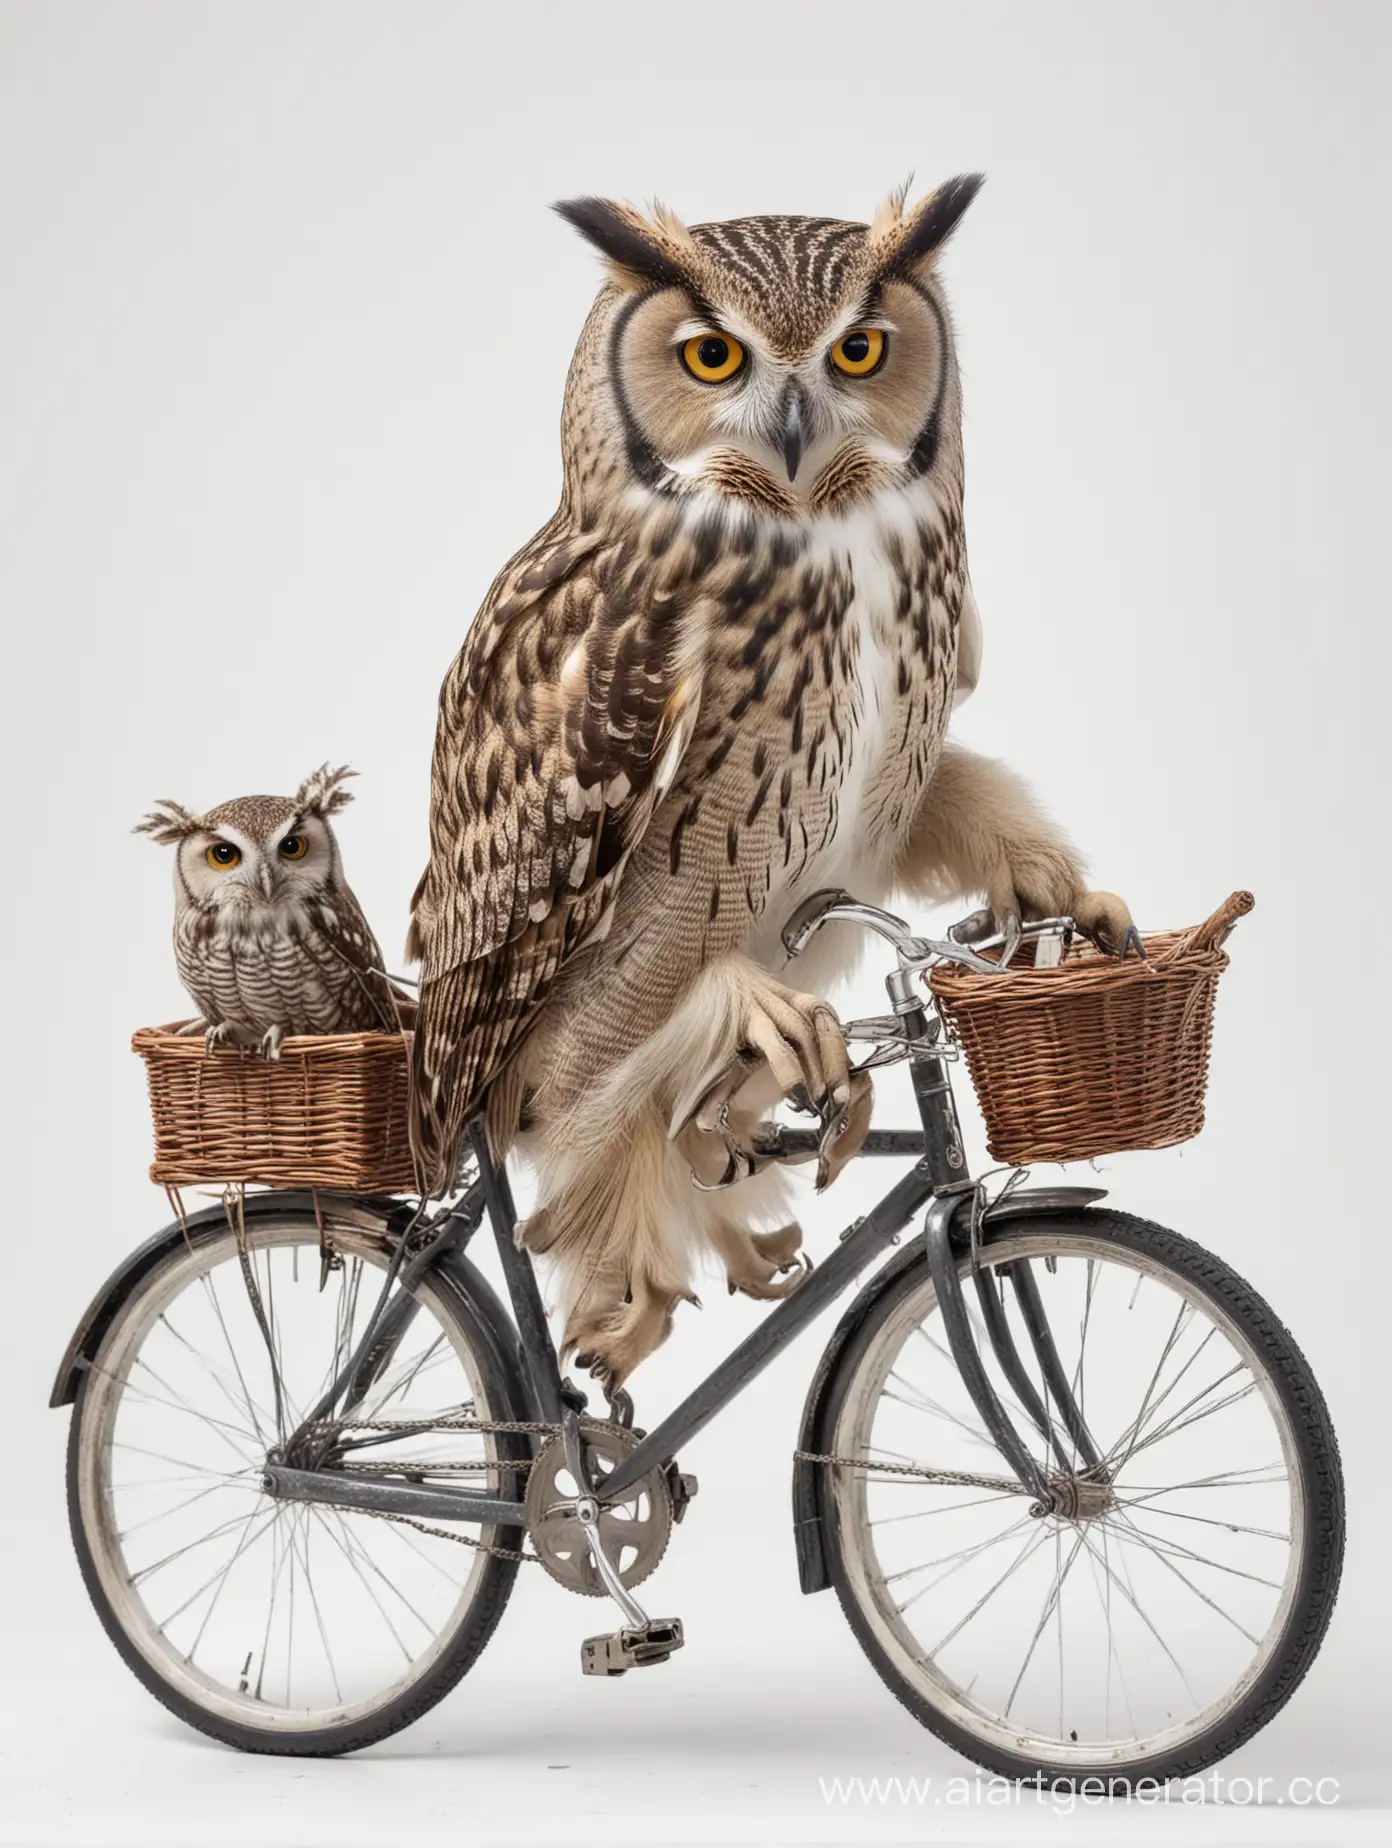 Owl-Riding-Bicycle-Whimsical-Avian-Adventure-Artwork